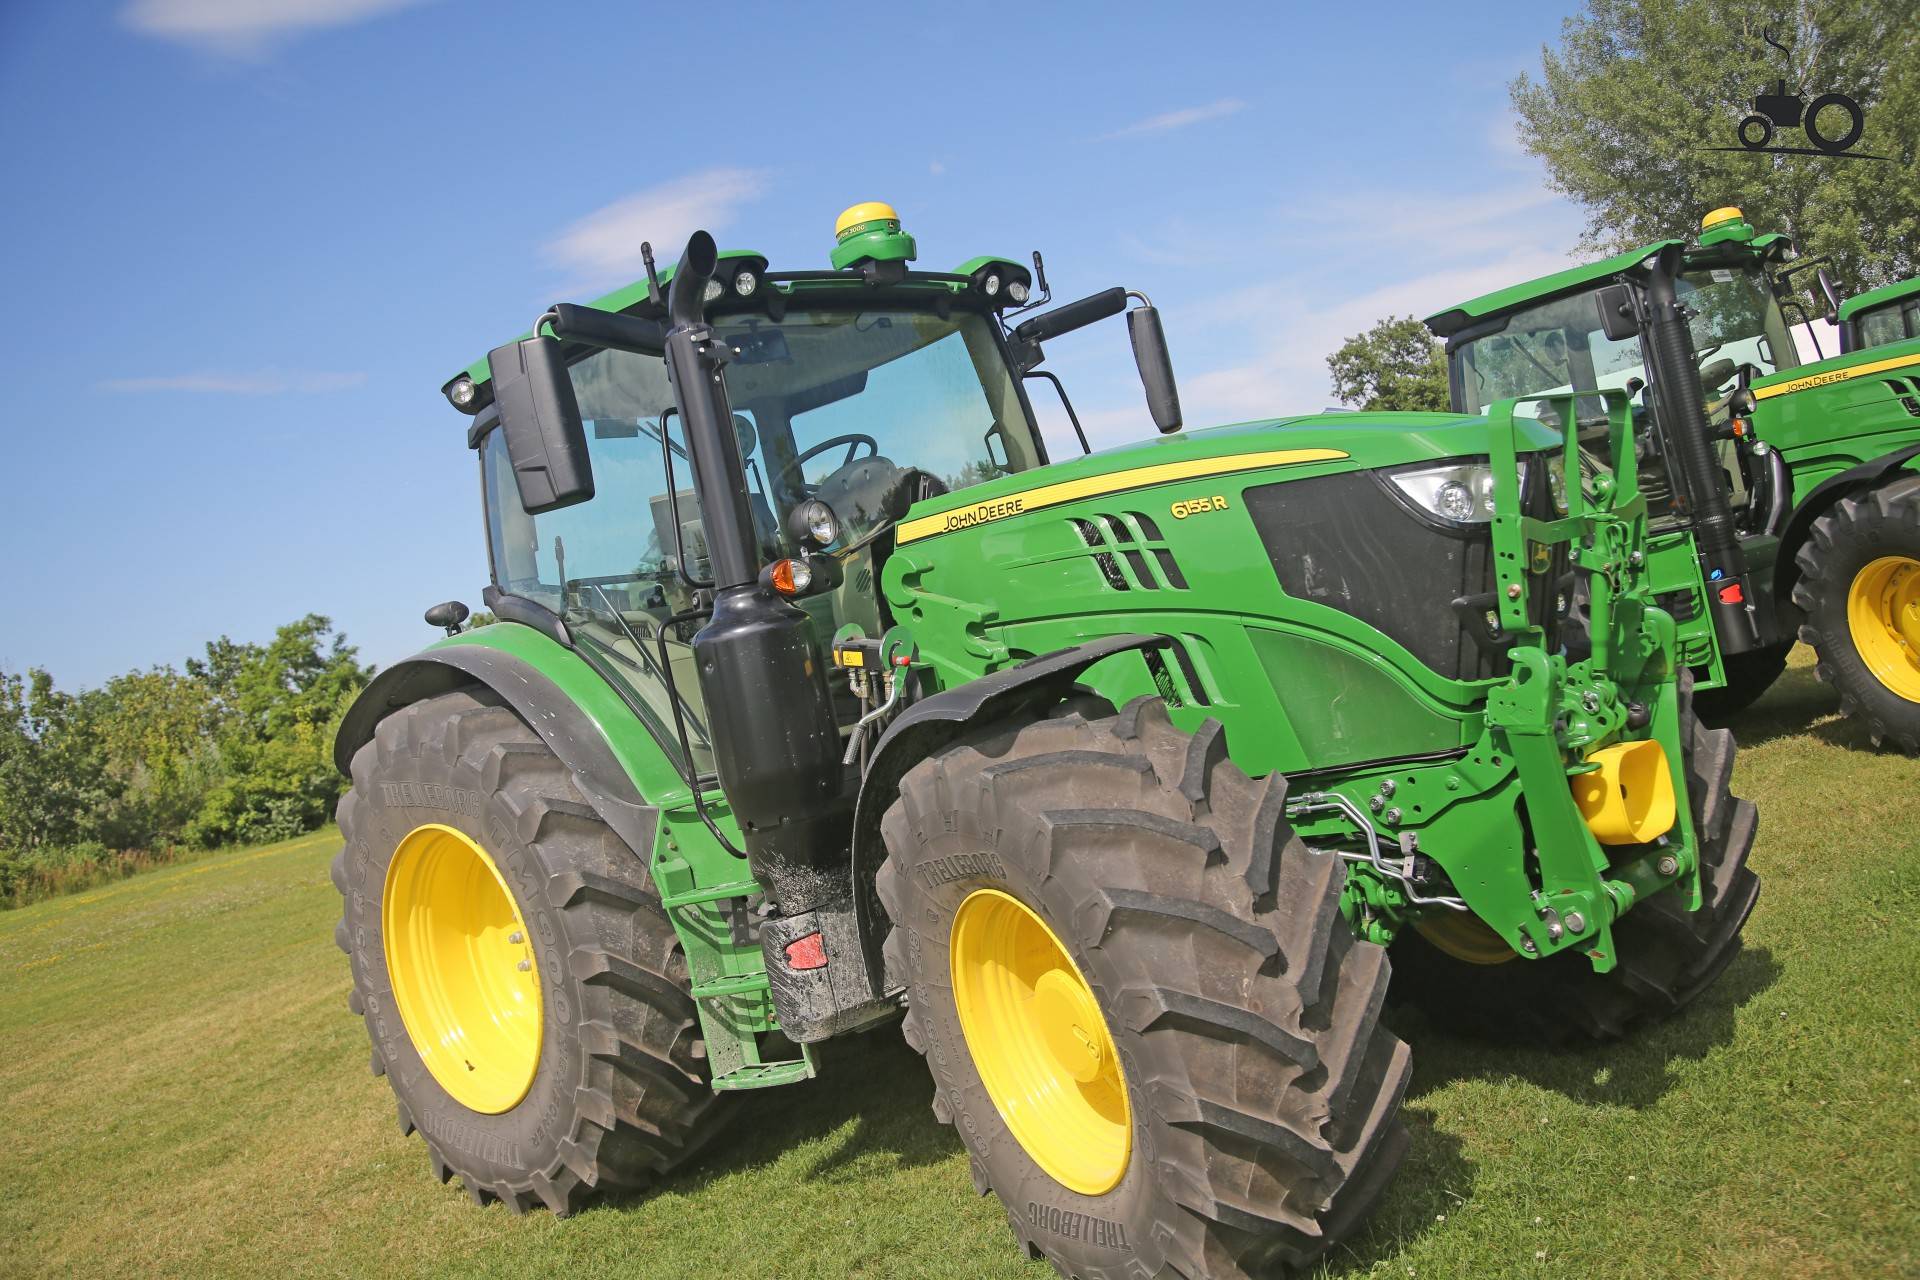 John Deere 6155R | Picture made by gator